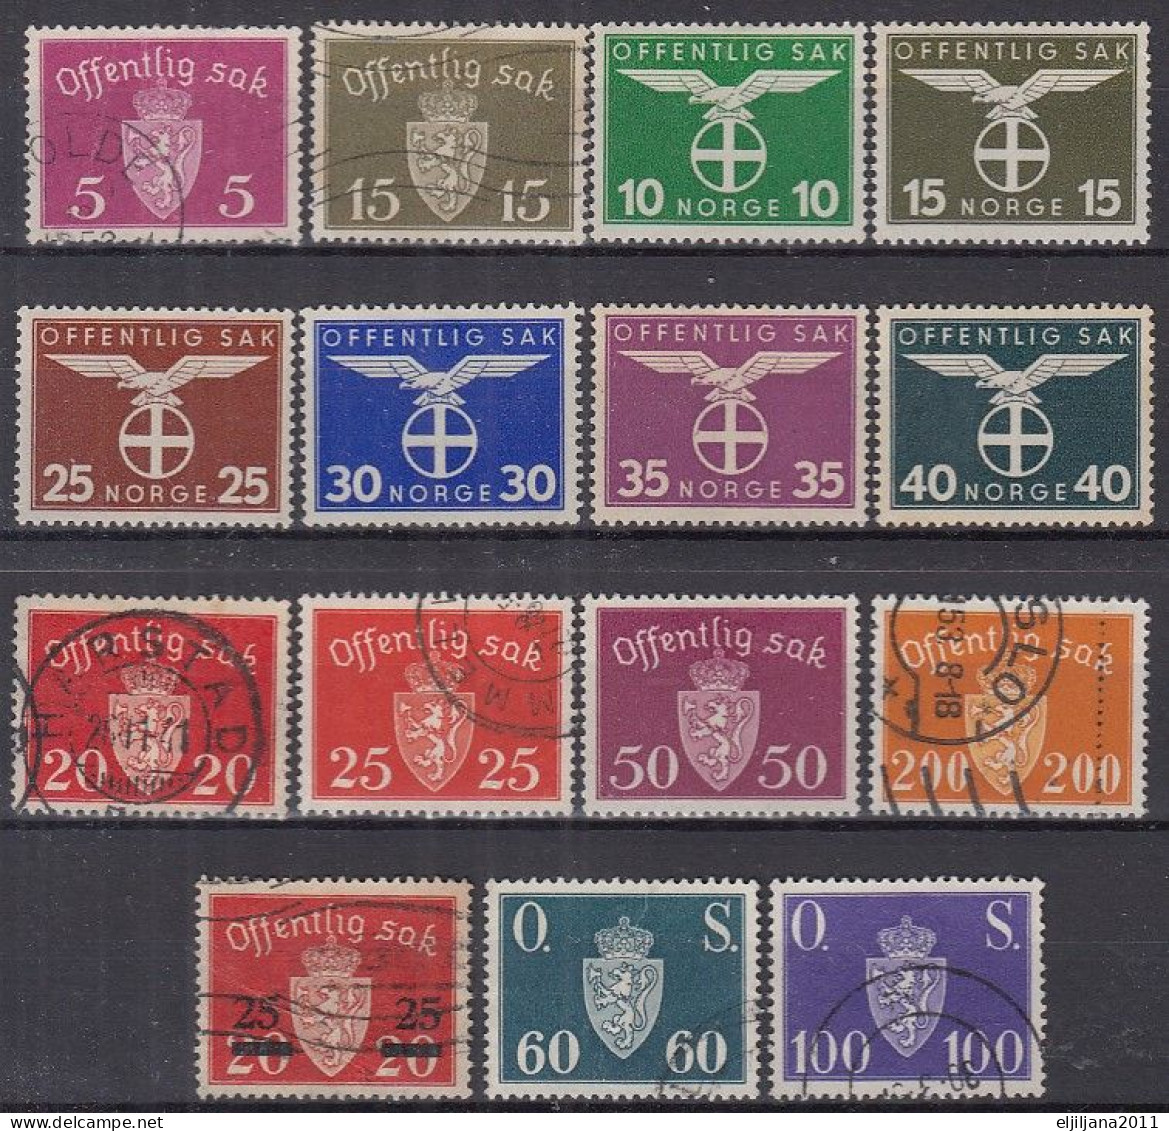 Action !! SALE !! 50 % OFF !! ⁕ Norway / NORGE 1937 - 1952 ⁕ Official Stamps ⁕ 15v MH & Used - Officials